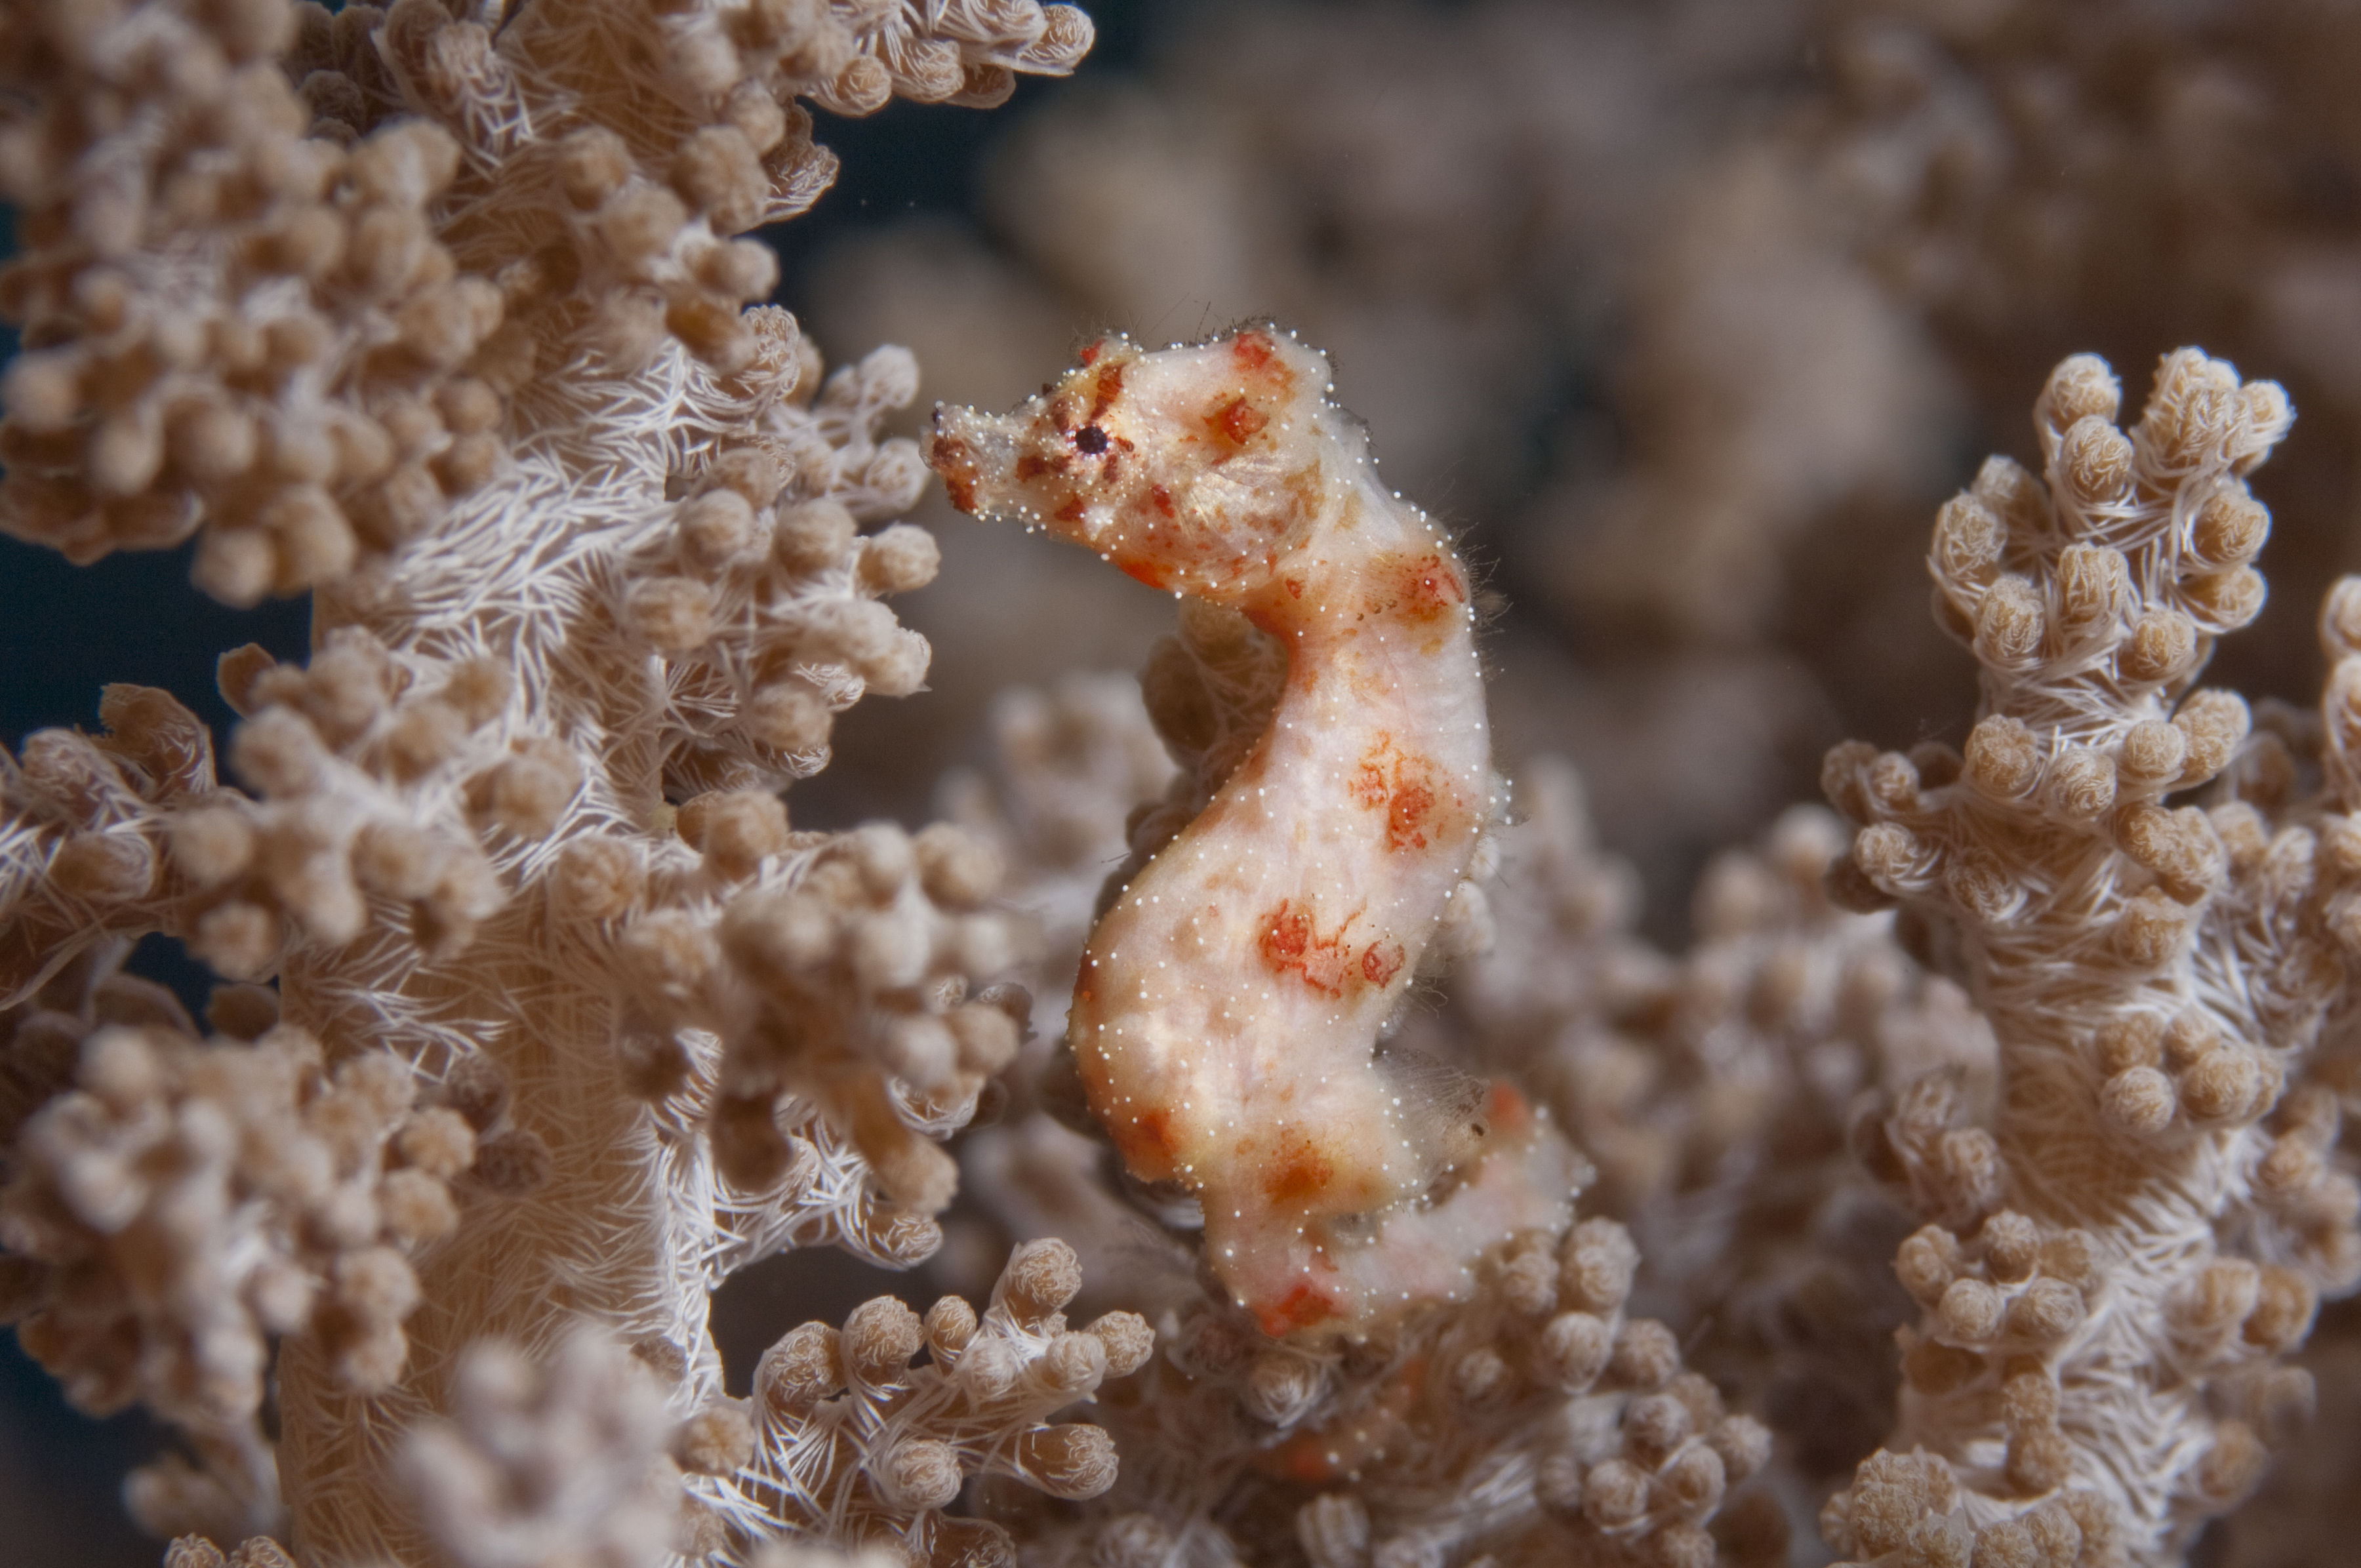 Walea soft coral pygmy seahorse found only in a small Indonesian bay, Togian Islands, Indonesia. Photo by Dr Richard Smith